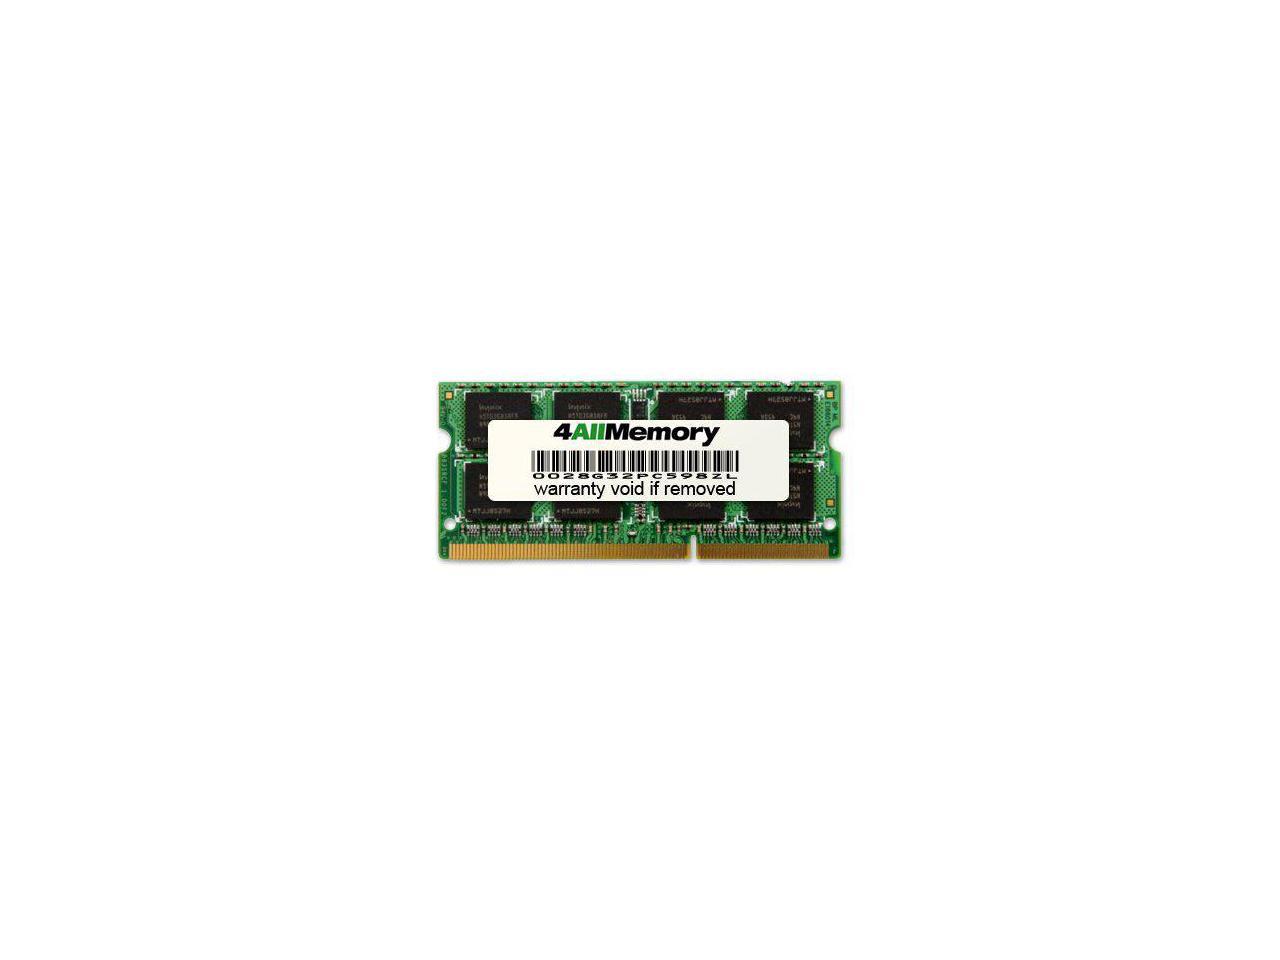 4GB DDR3-1066 RAM Memory Upgrade for The Acer TravelMate TM7750-2354G32Mnss PC3-8500